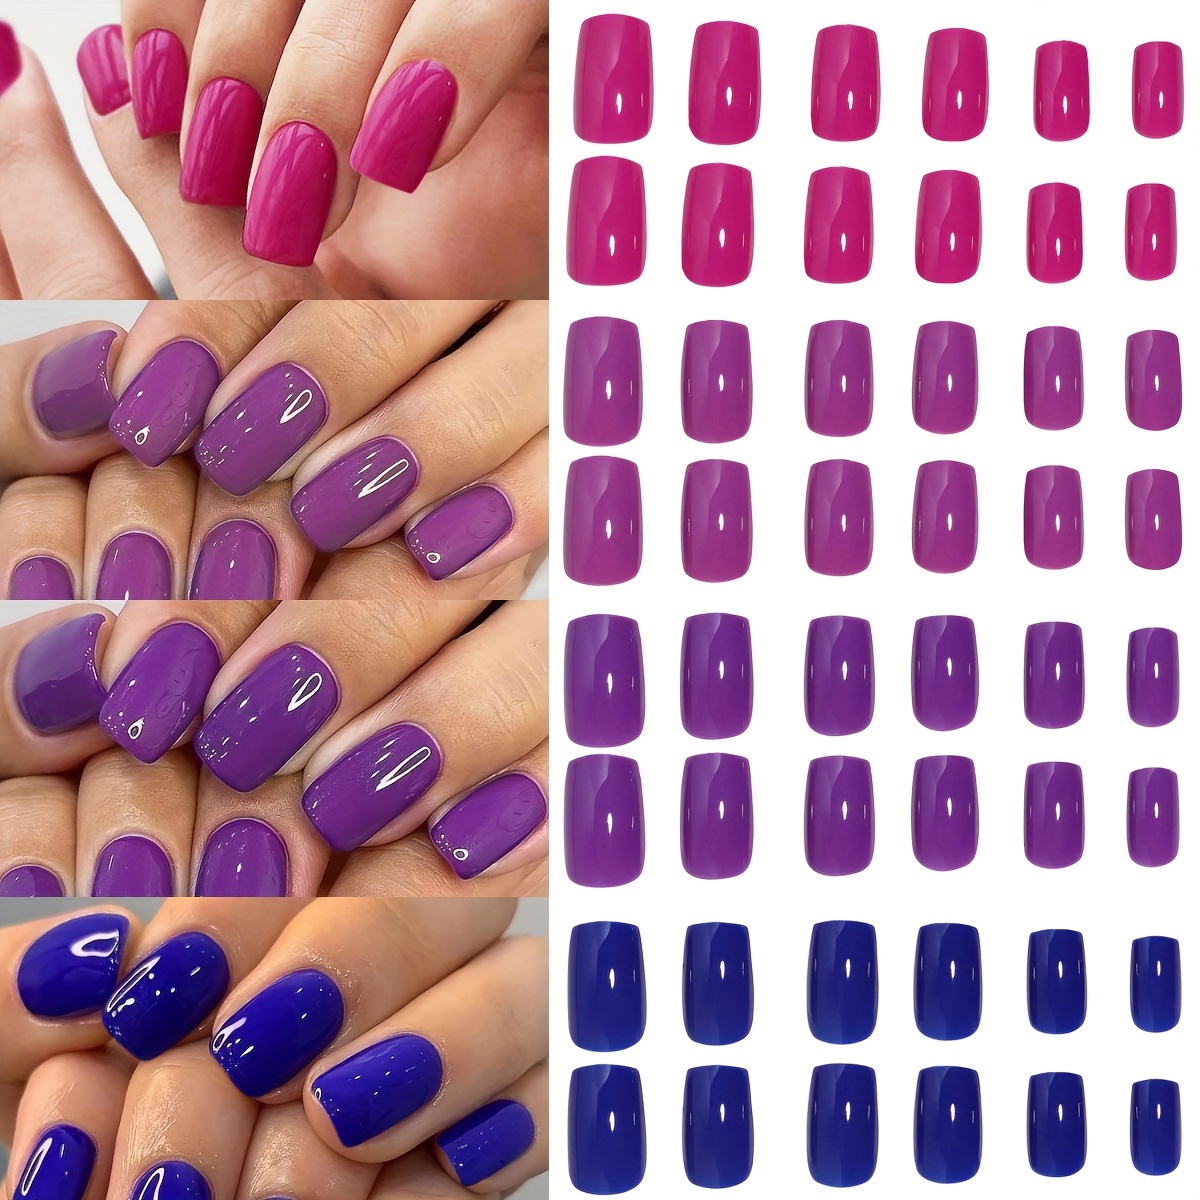 

4packs (96 Pcs) Glossy Medium Square Press On Nails, Mixed Blue Purple Fake Nails Solid Color Glue On Nails Set With Adhesive Tabs And Nail File For Women